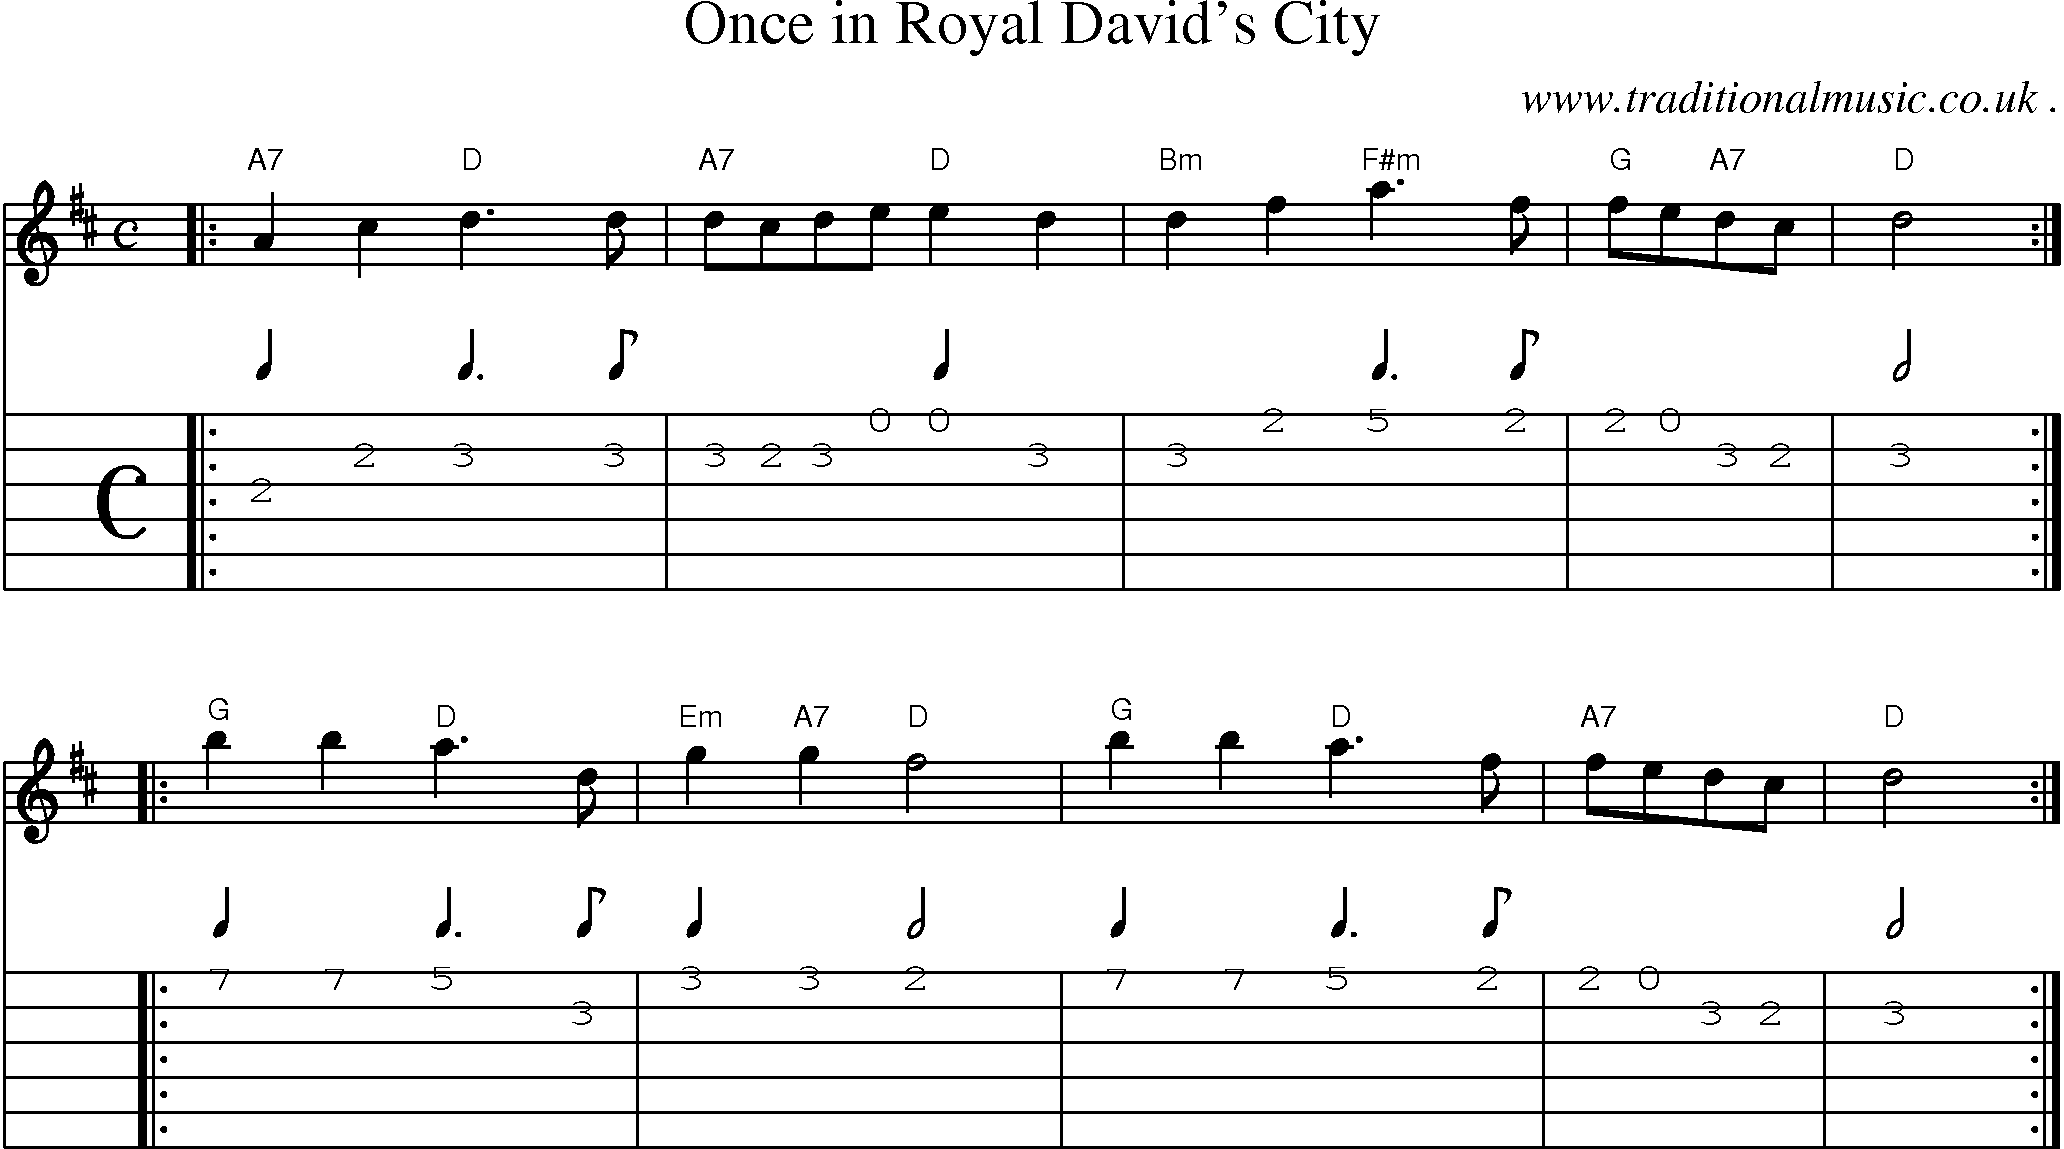 Sheet-music  score, Chords and Guitar Tabs for Once In Royal Davids City